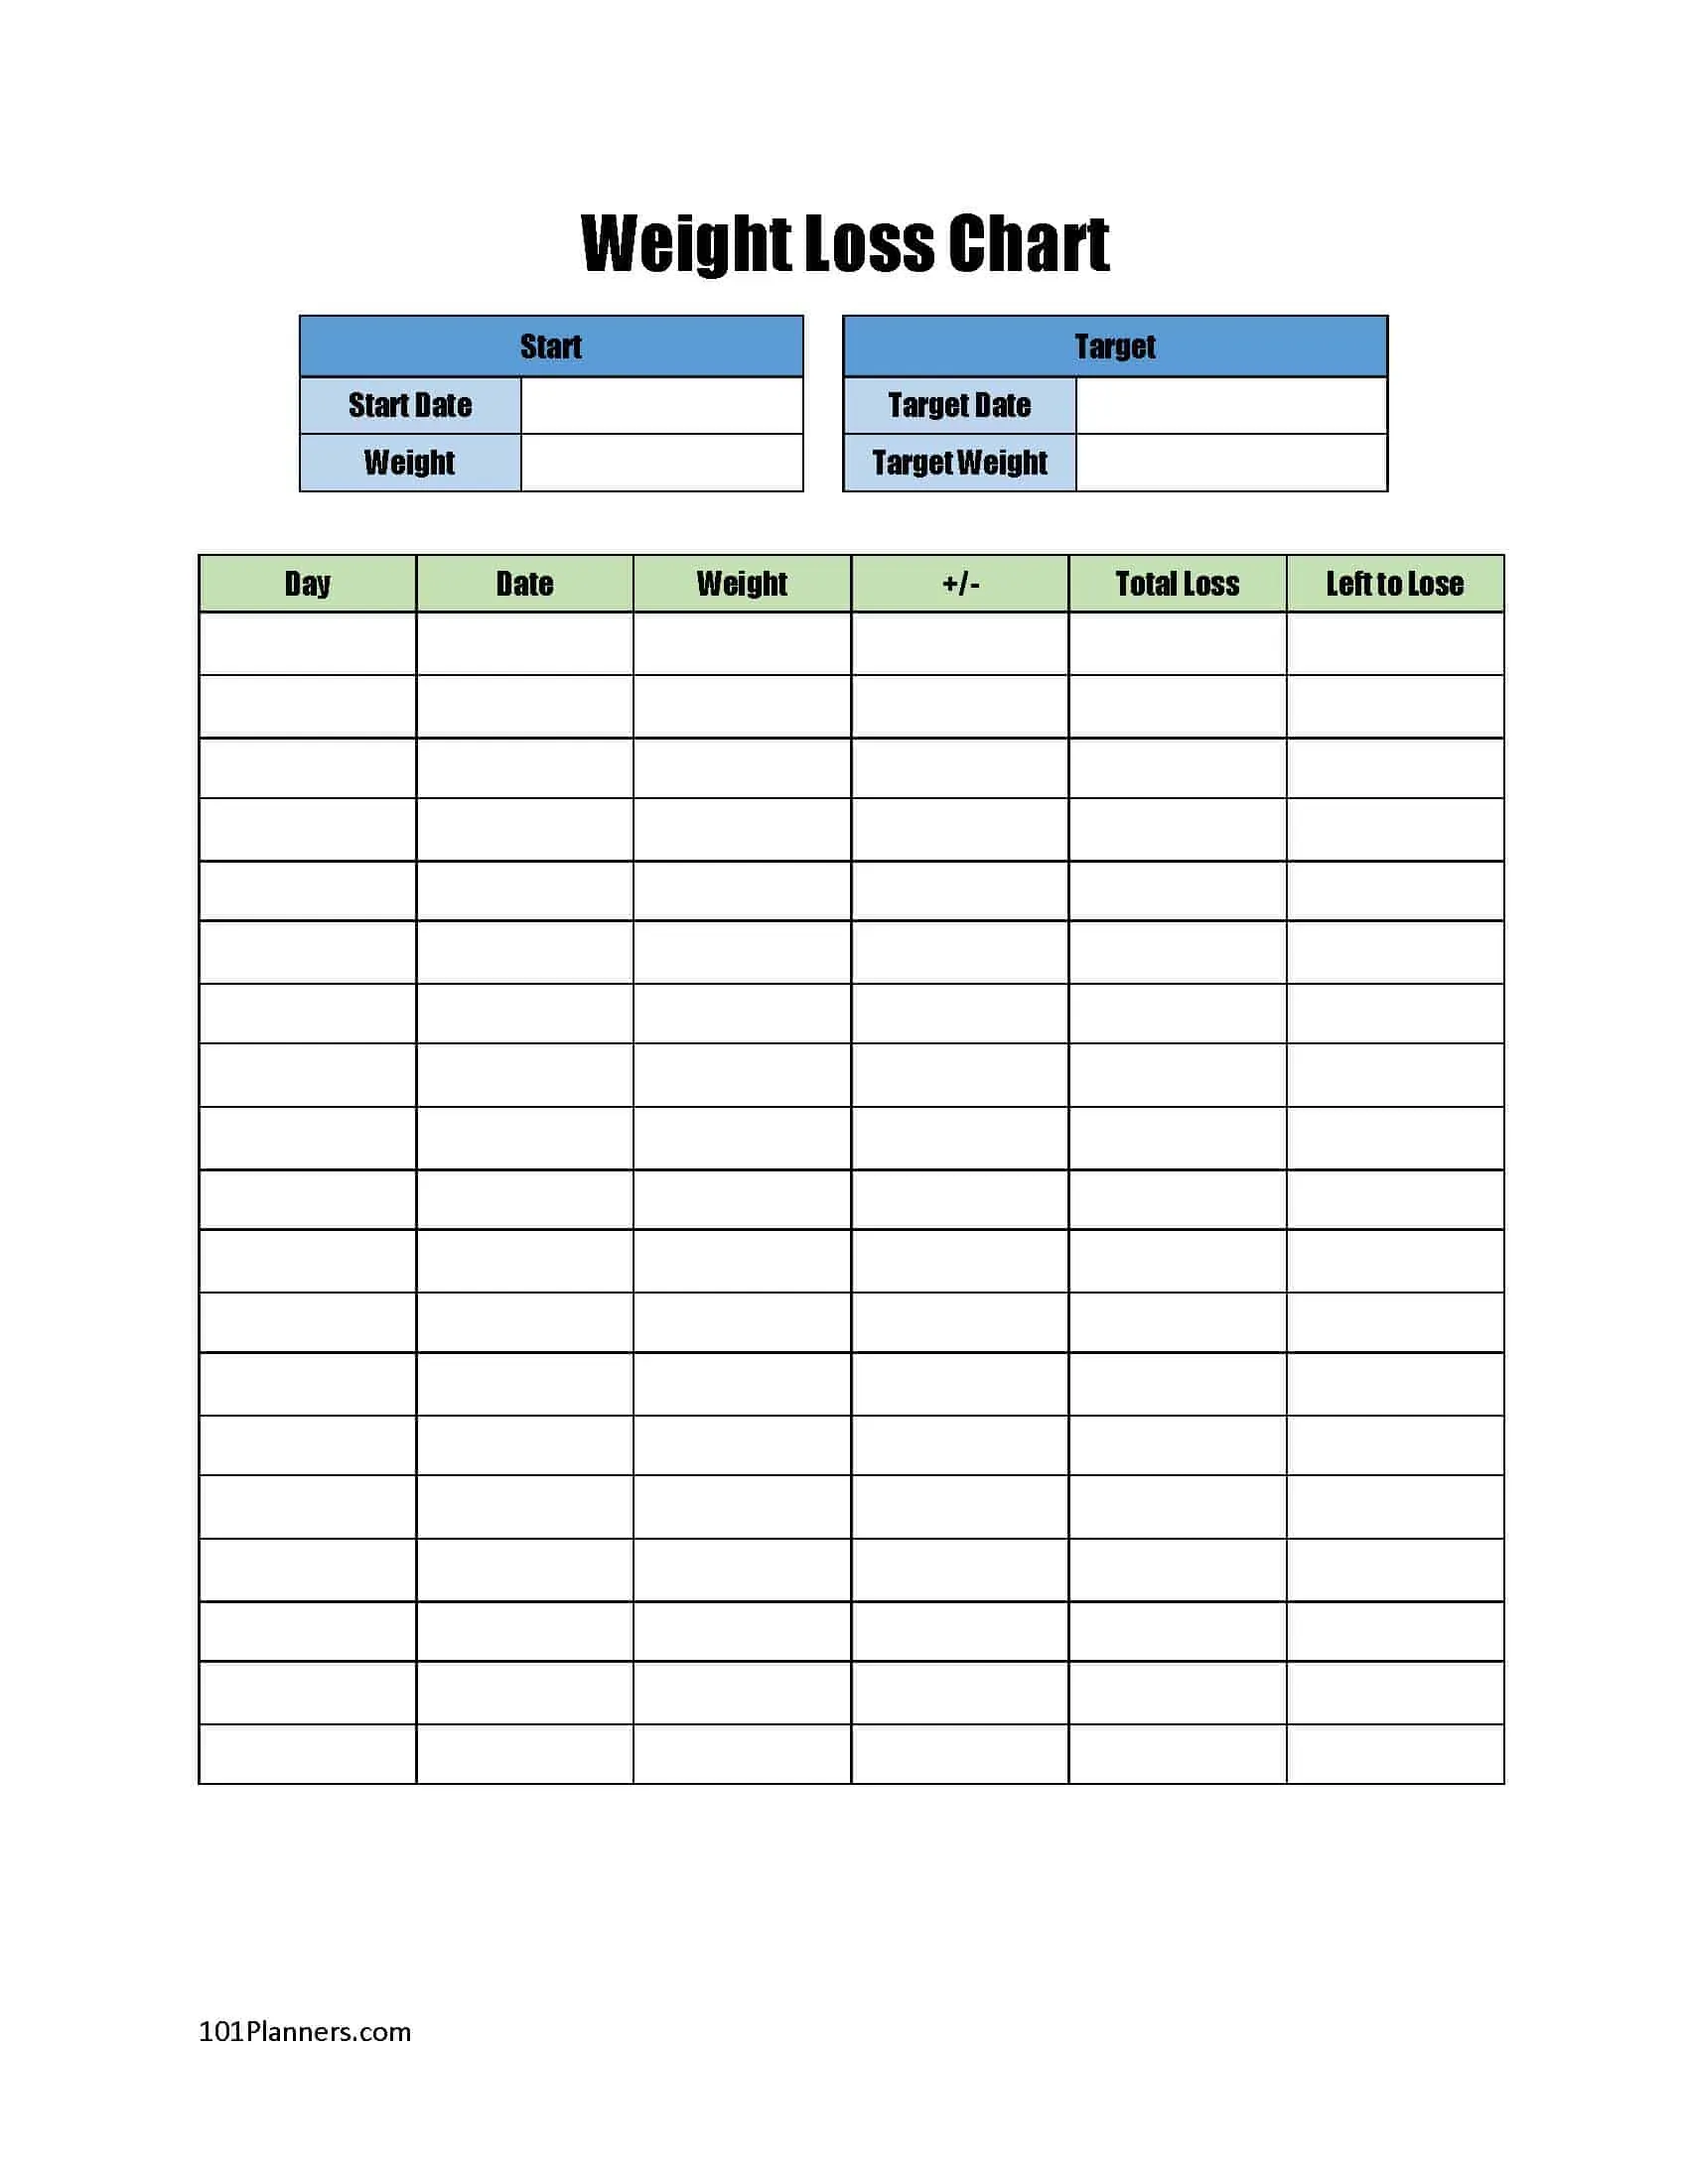 Weight management tracking